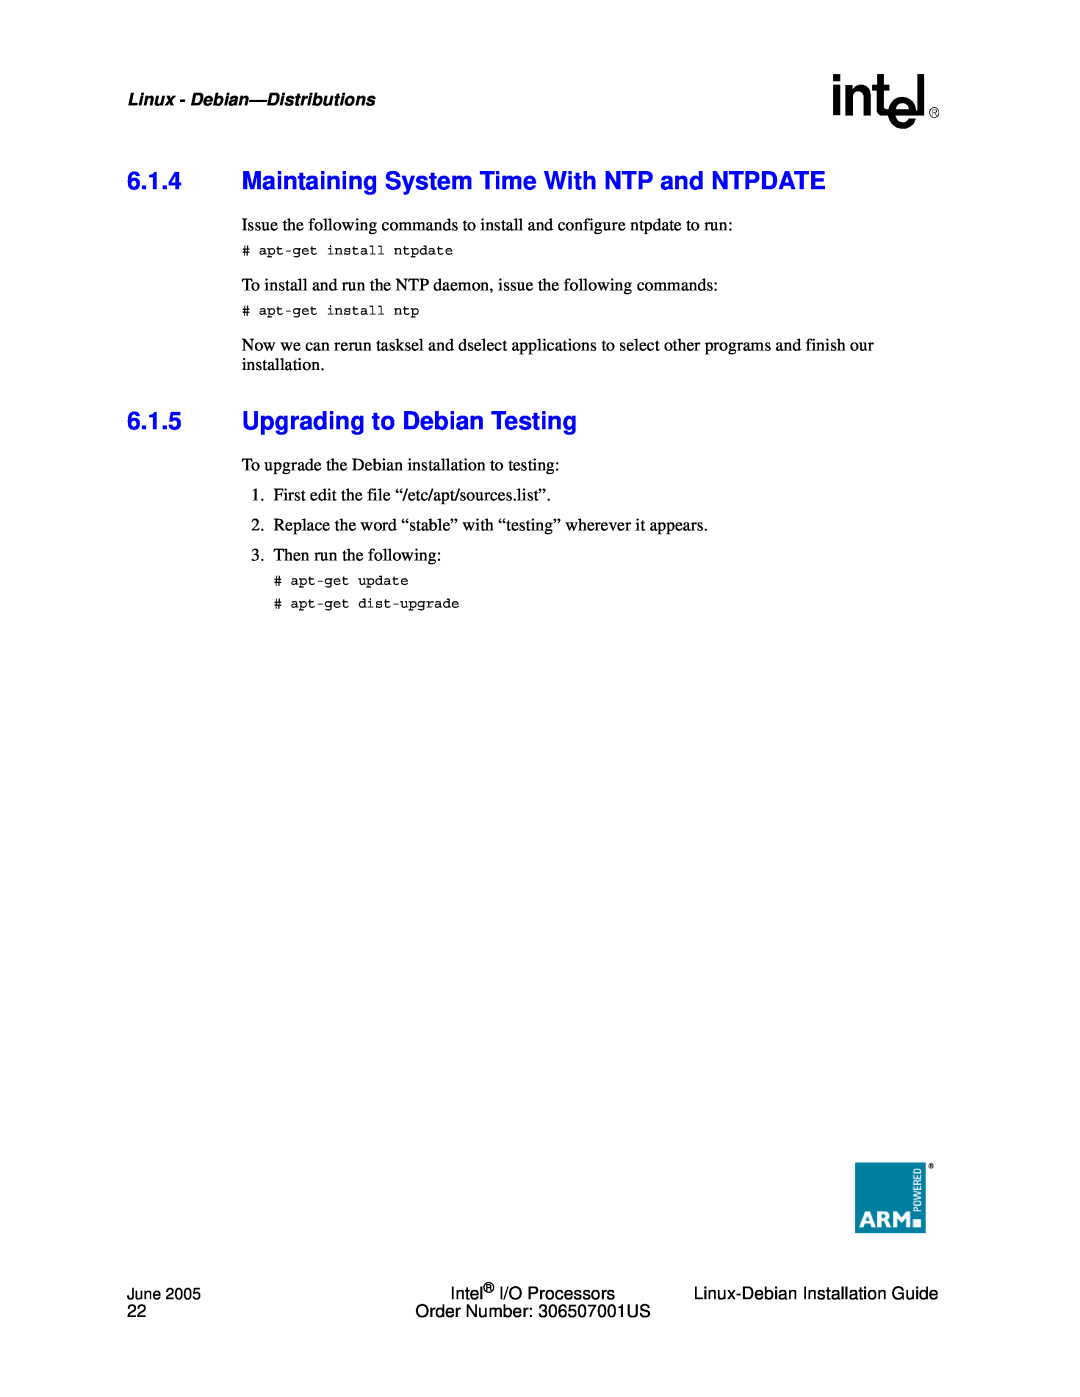 Intel I/O Processor manual 6.1.4Maintaining System Time With NTP and NTPDATE, 6.1.5Upgrading to Debian Testing 